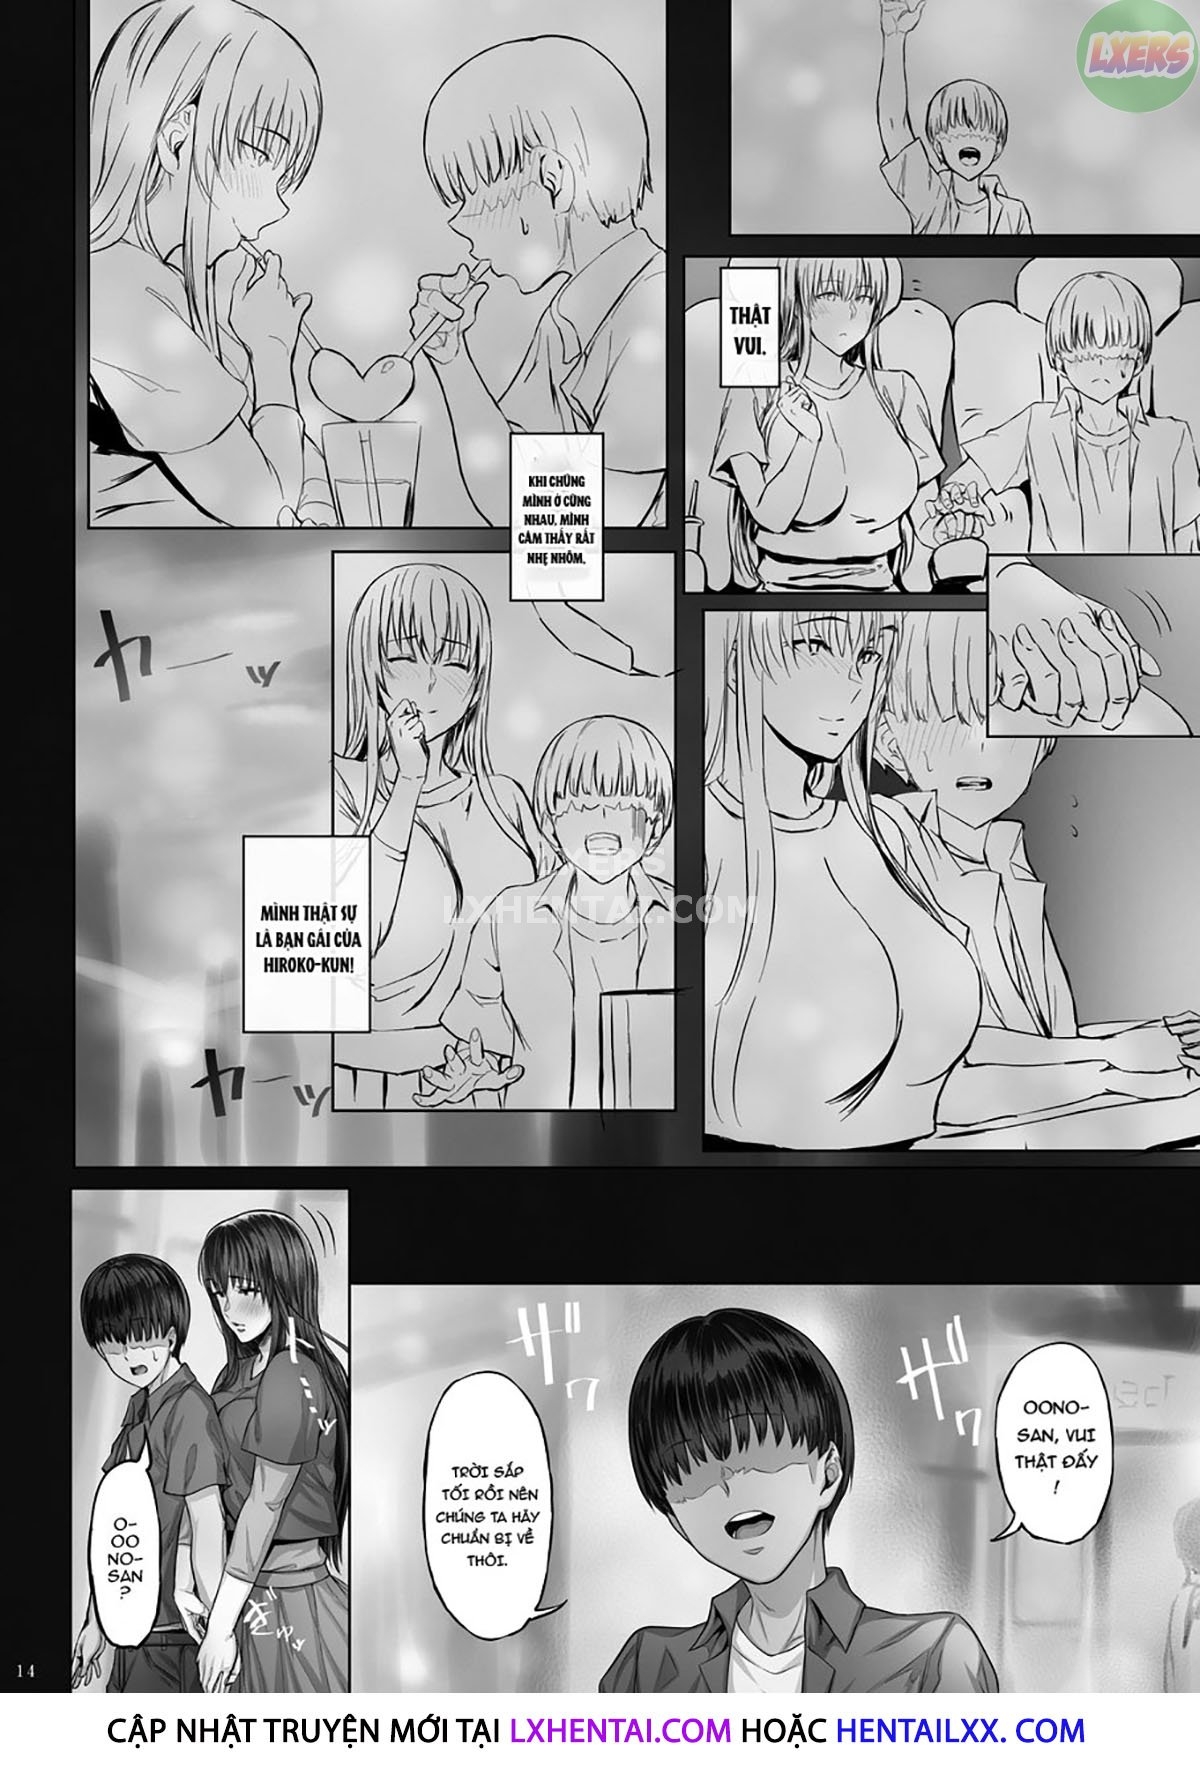 Xem ảnh What My Girlfriend Does That I Don't Know About - Chapter 2 END - 1646409763481_0 - Hentai24h.Tv